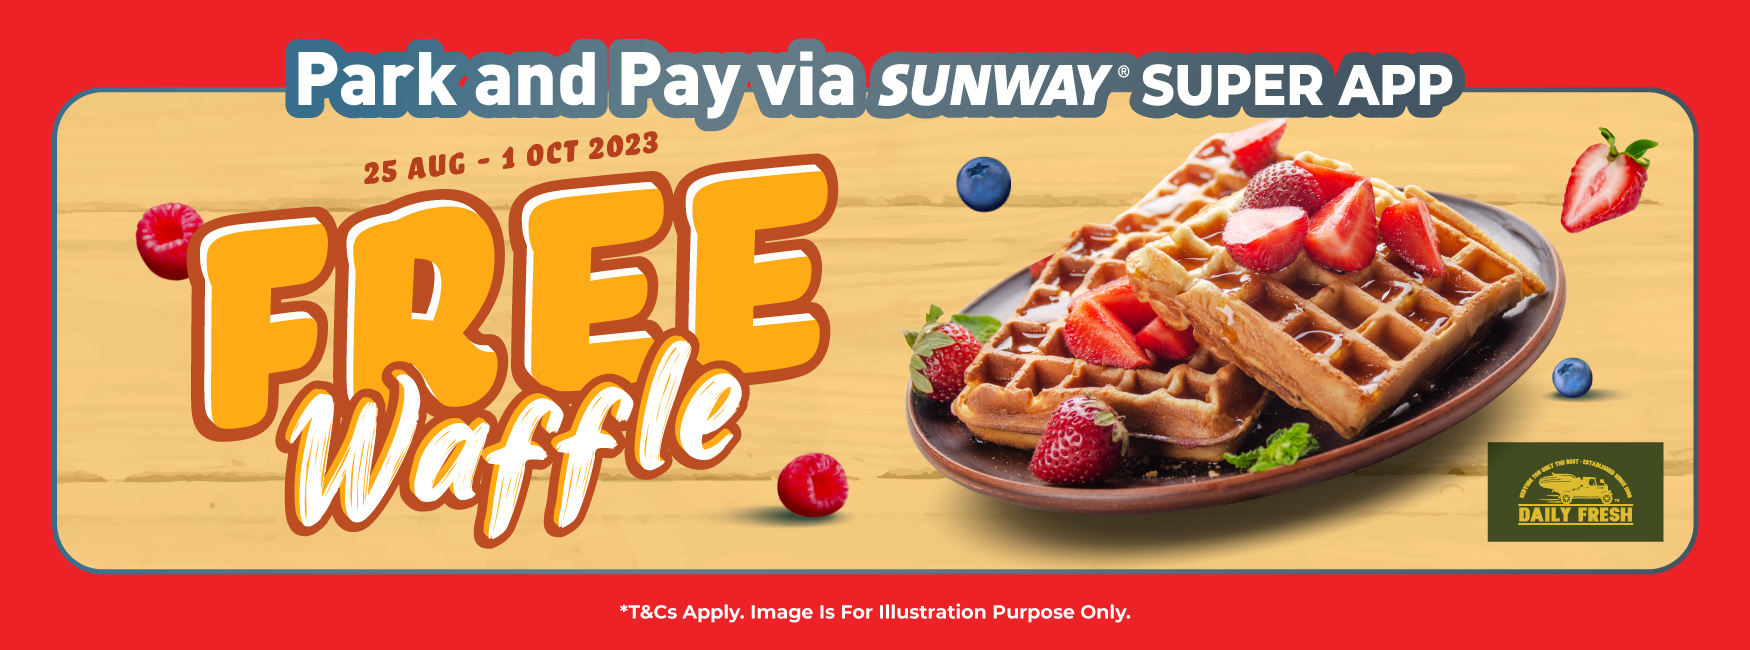 FREE WAFFLE FROM DAILY FRESH